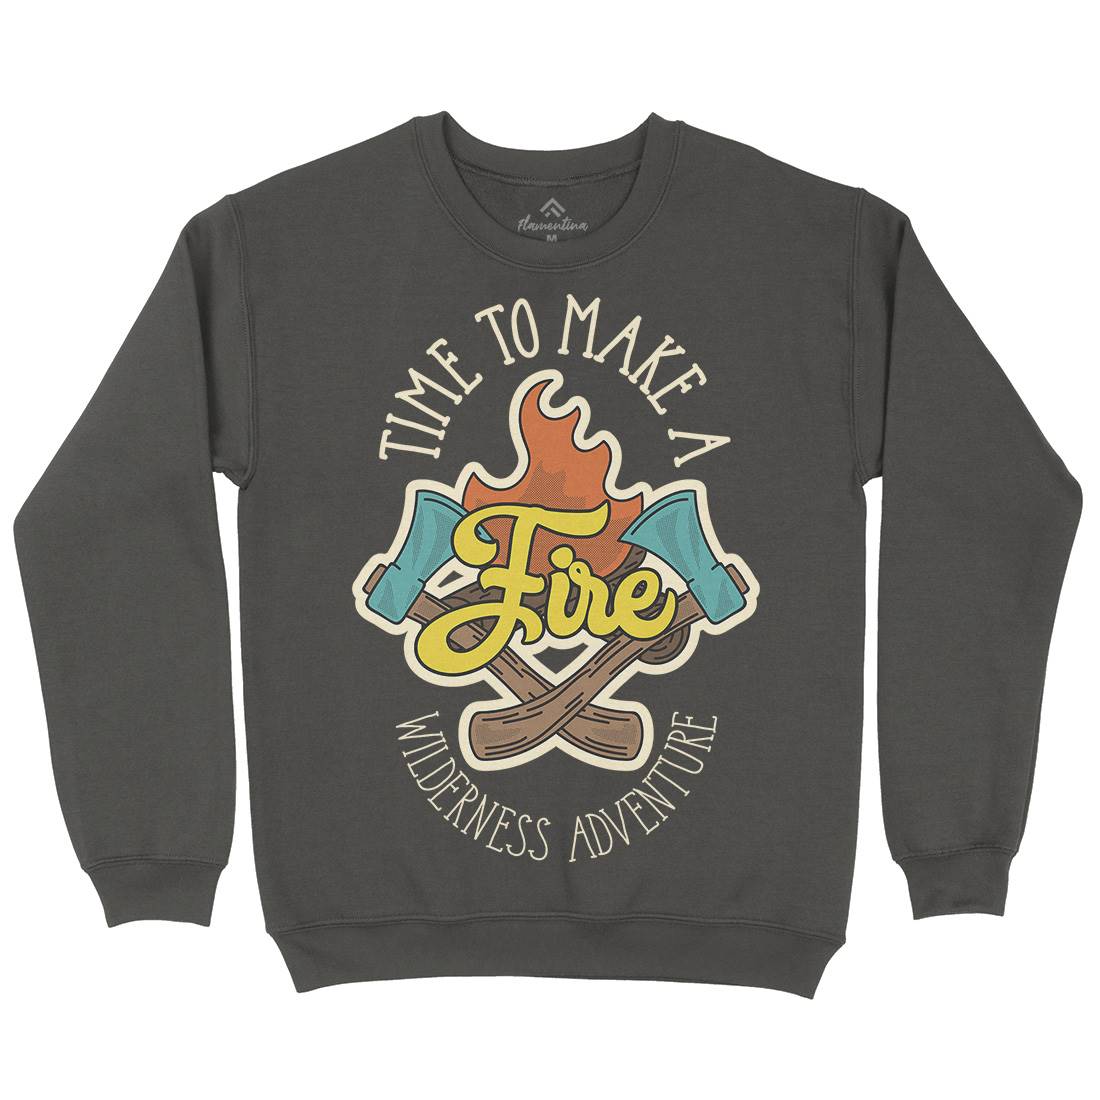 Time To Make Fire Mens Crew Neck Sweatshirt Nature D992